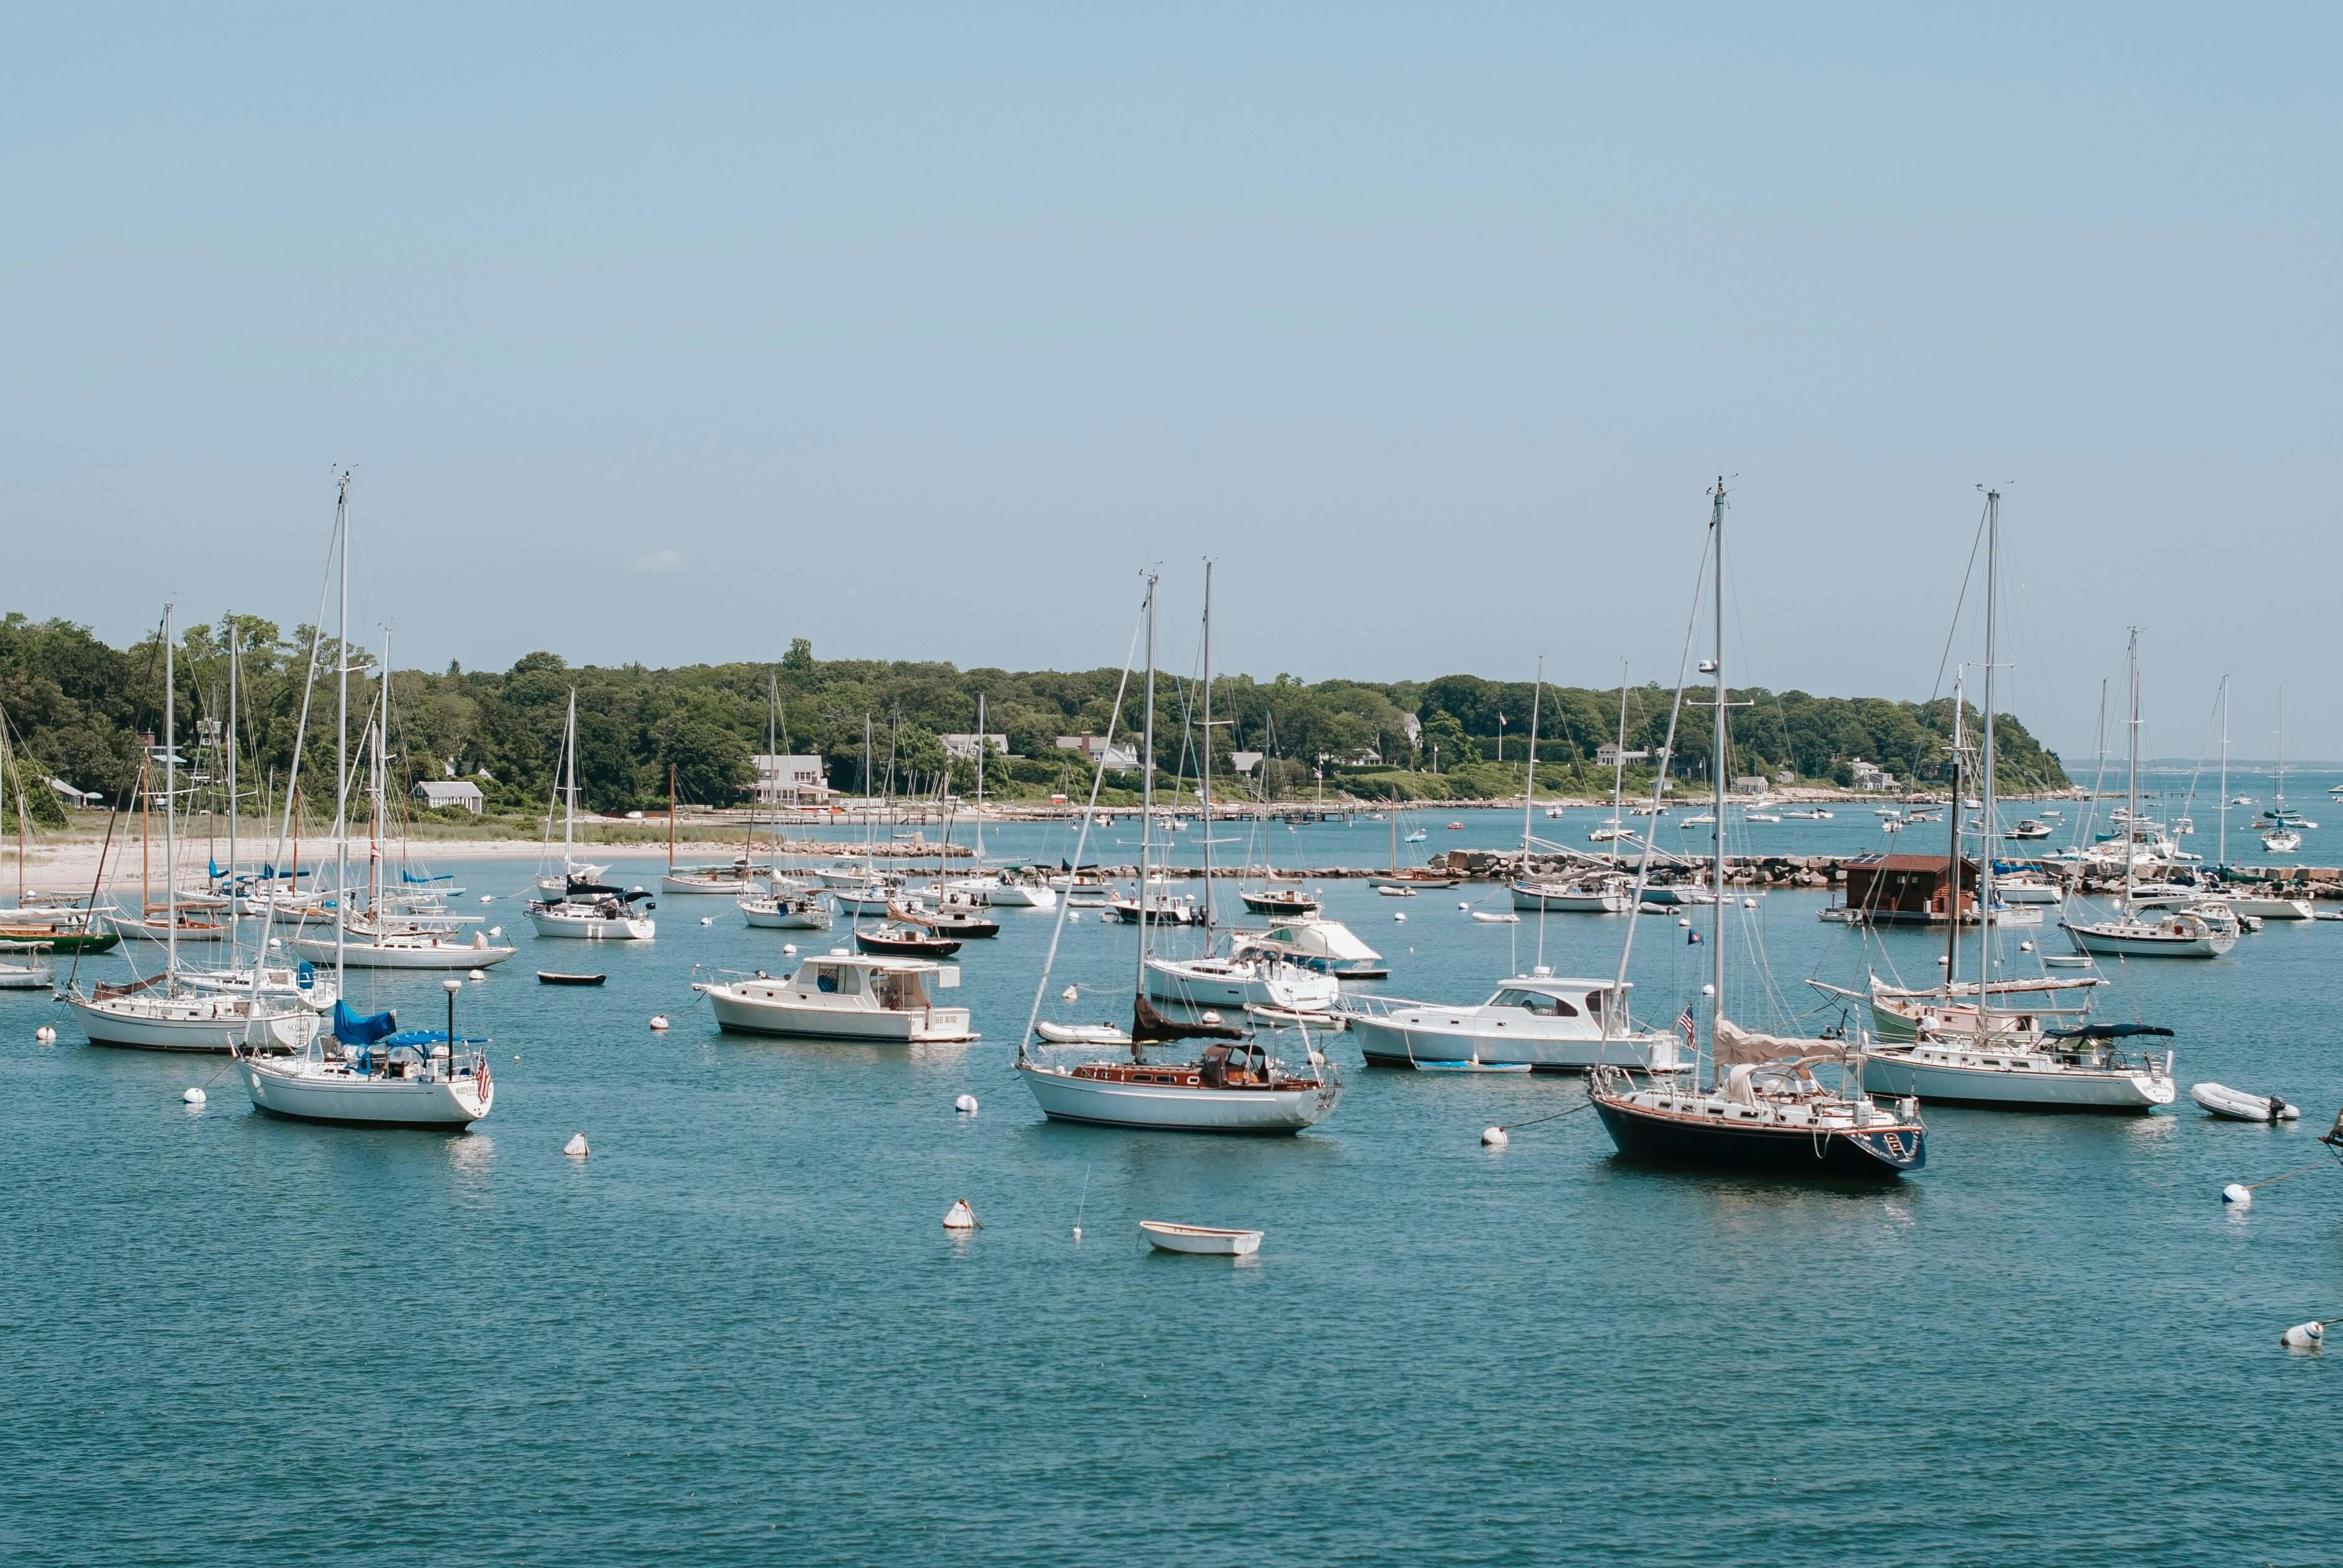 A photo of Lucy Vincent Beach on Martha's Vineyard courtesy of Martha's Vineyard Real Estate through Seacoast Properties.